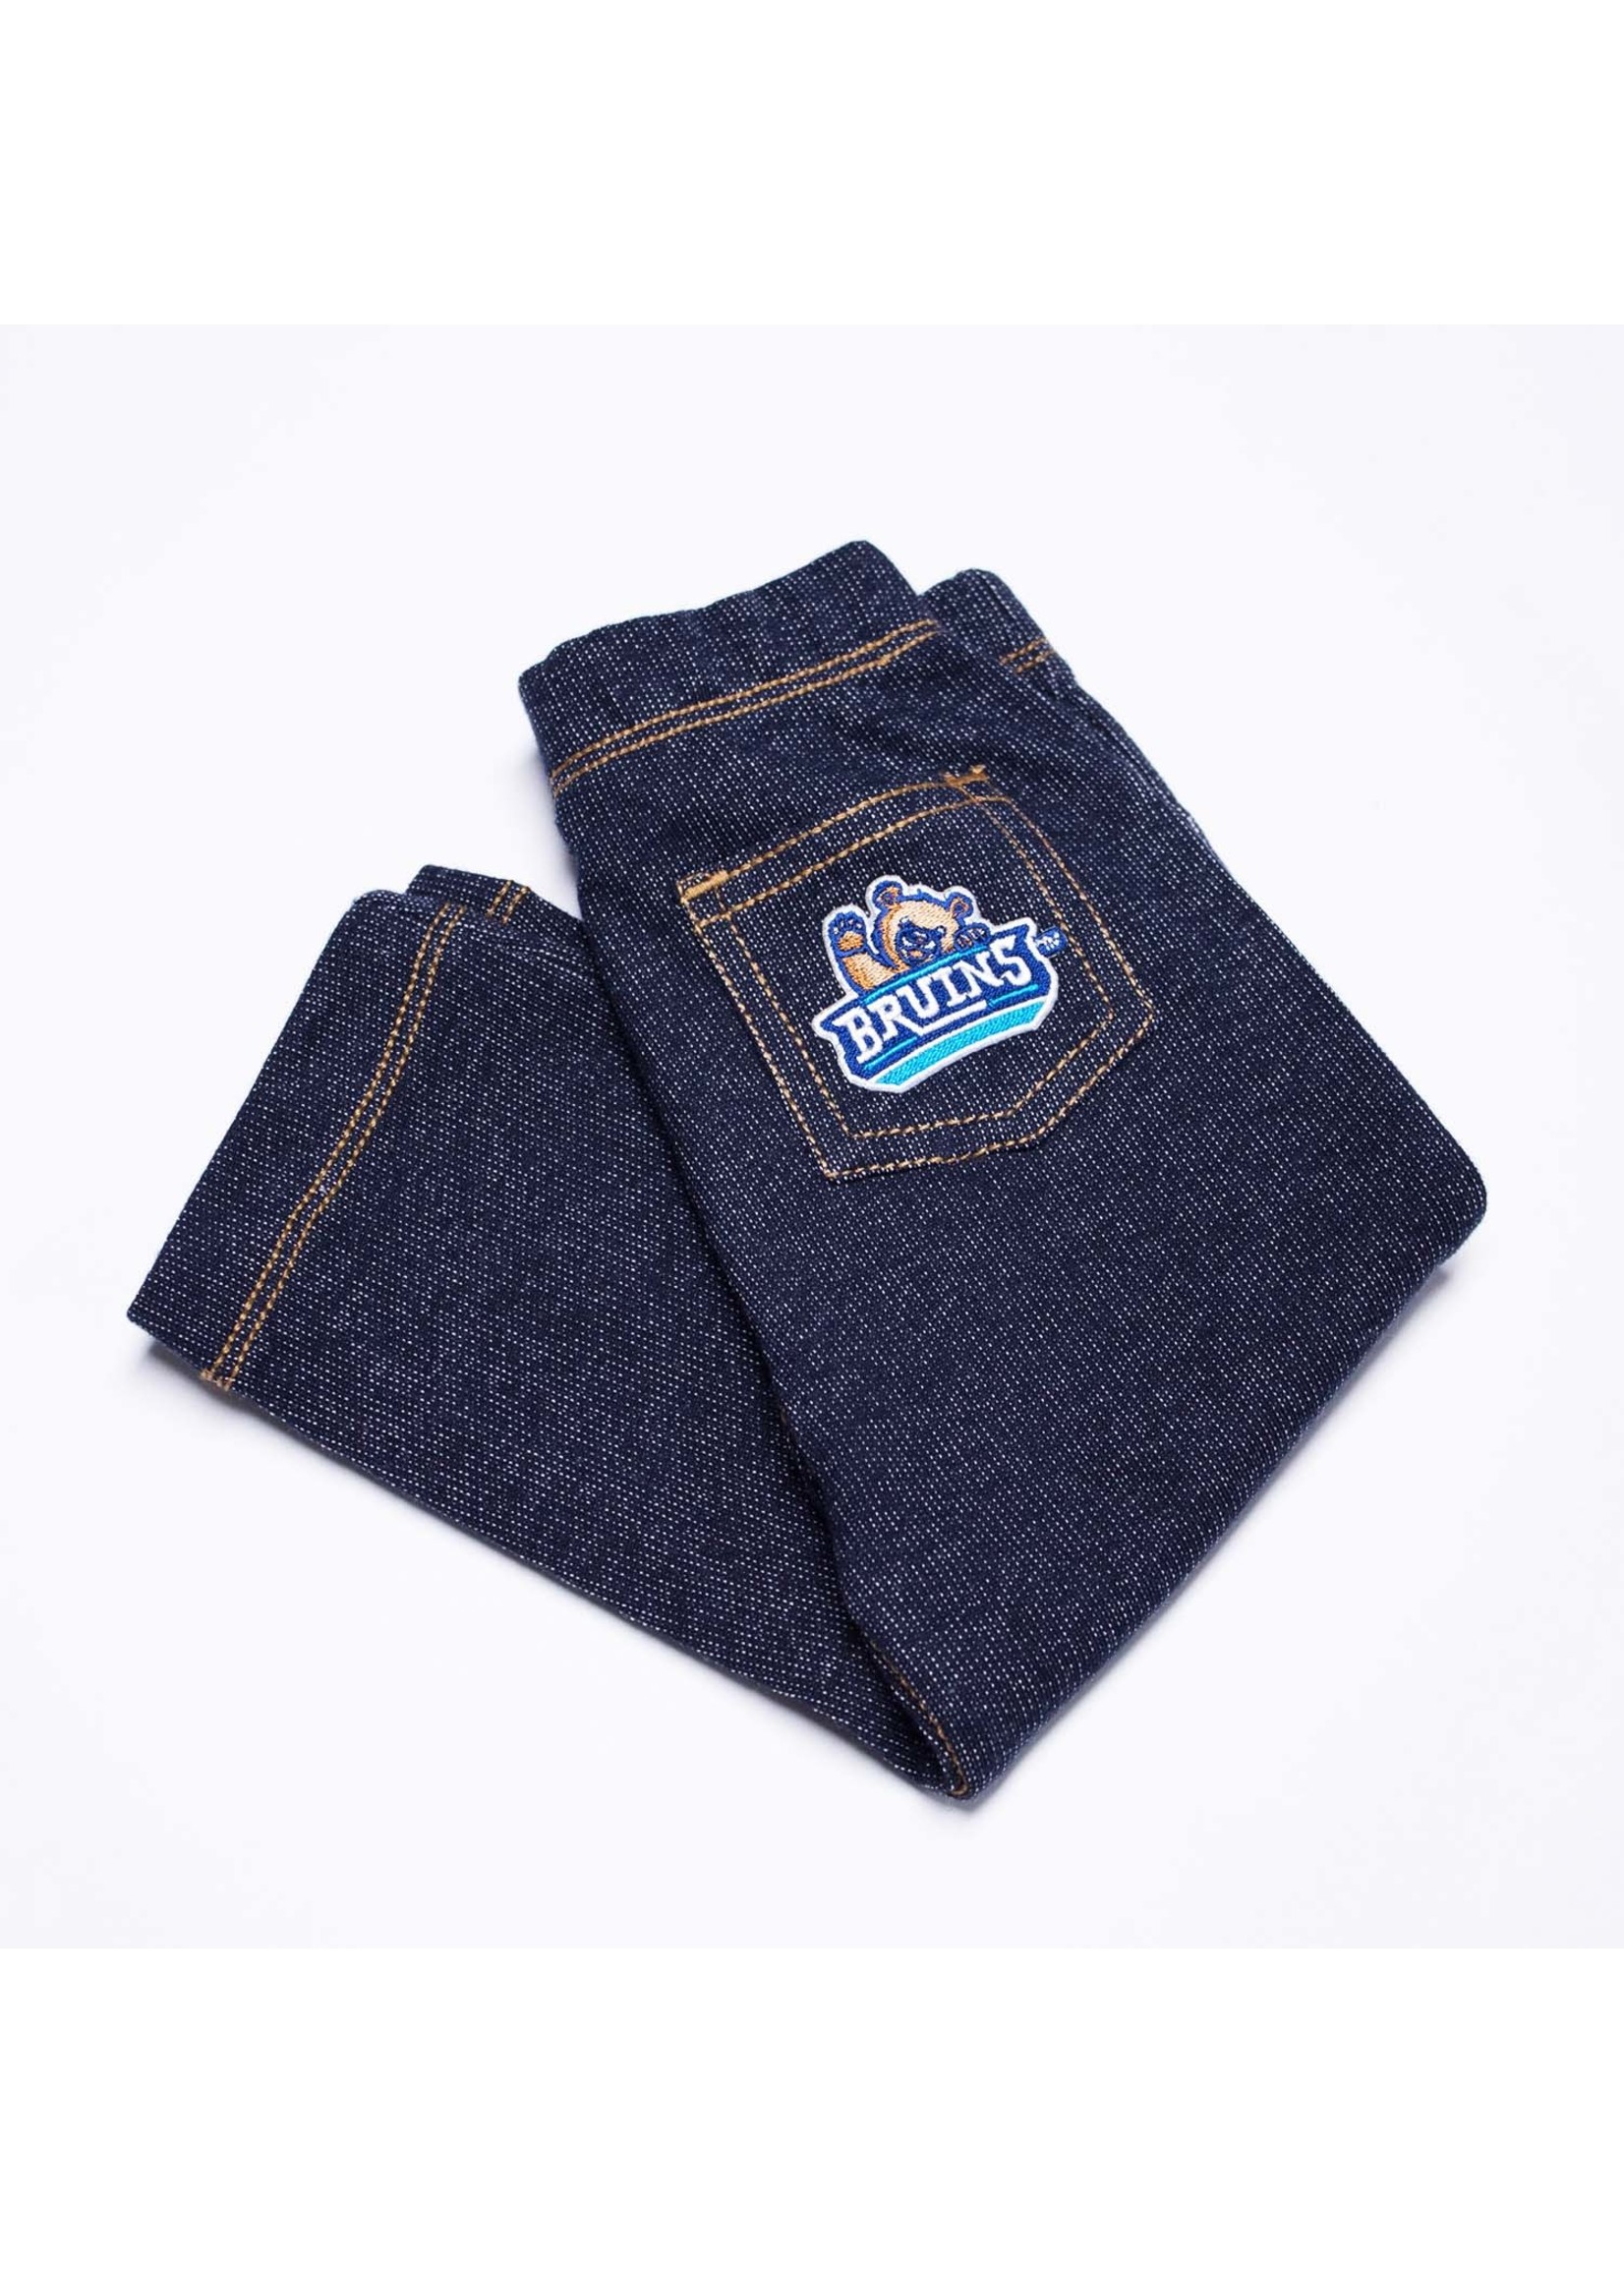 Baby Bruins Jeans